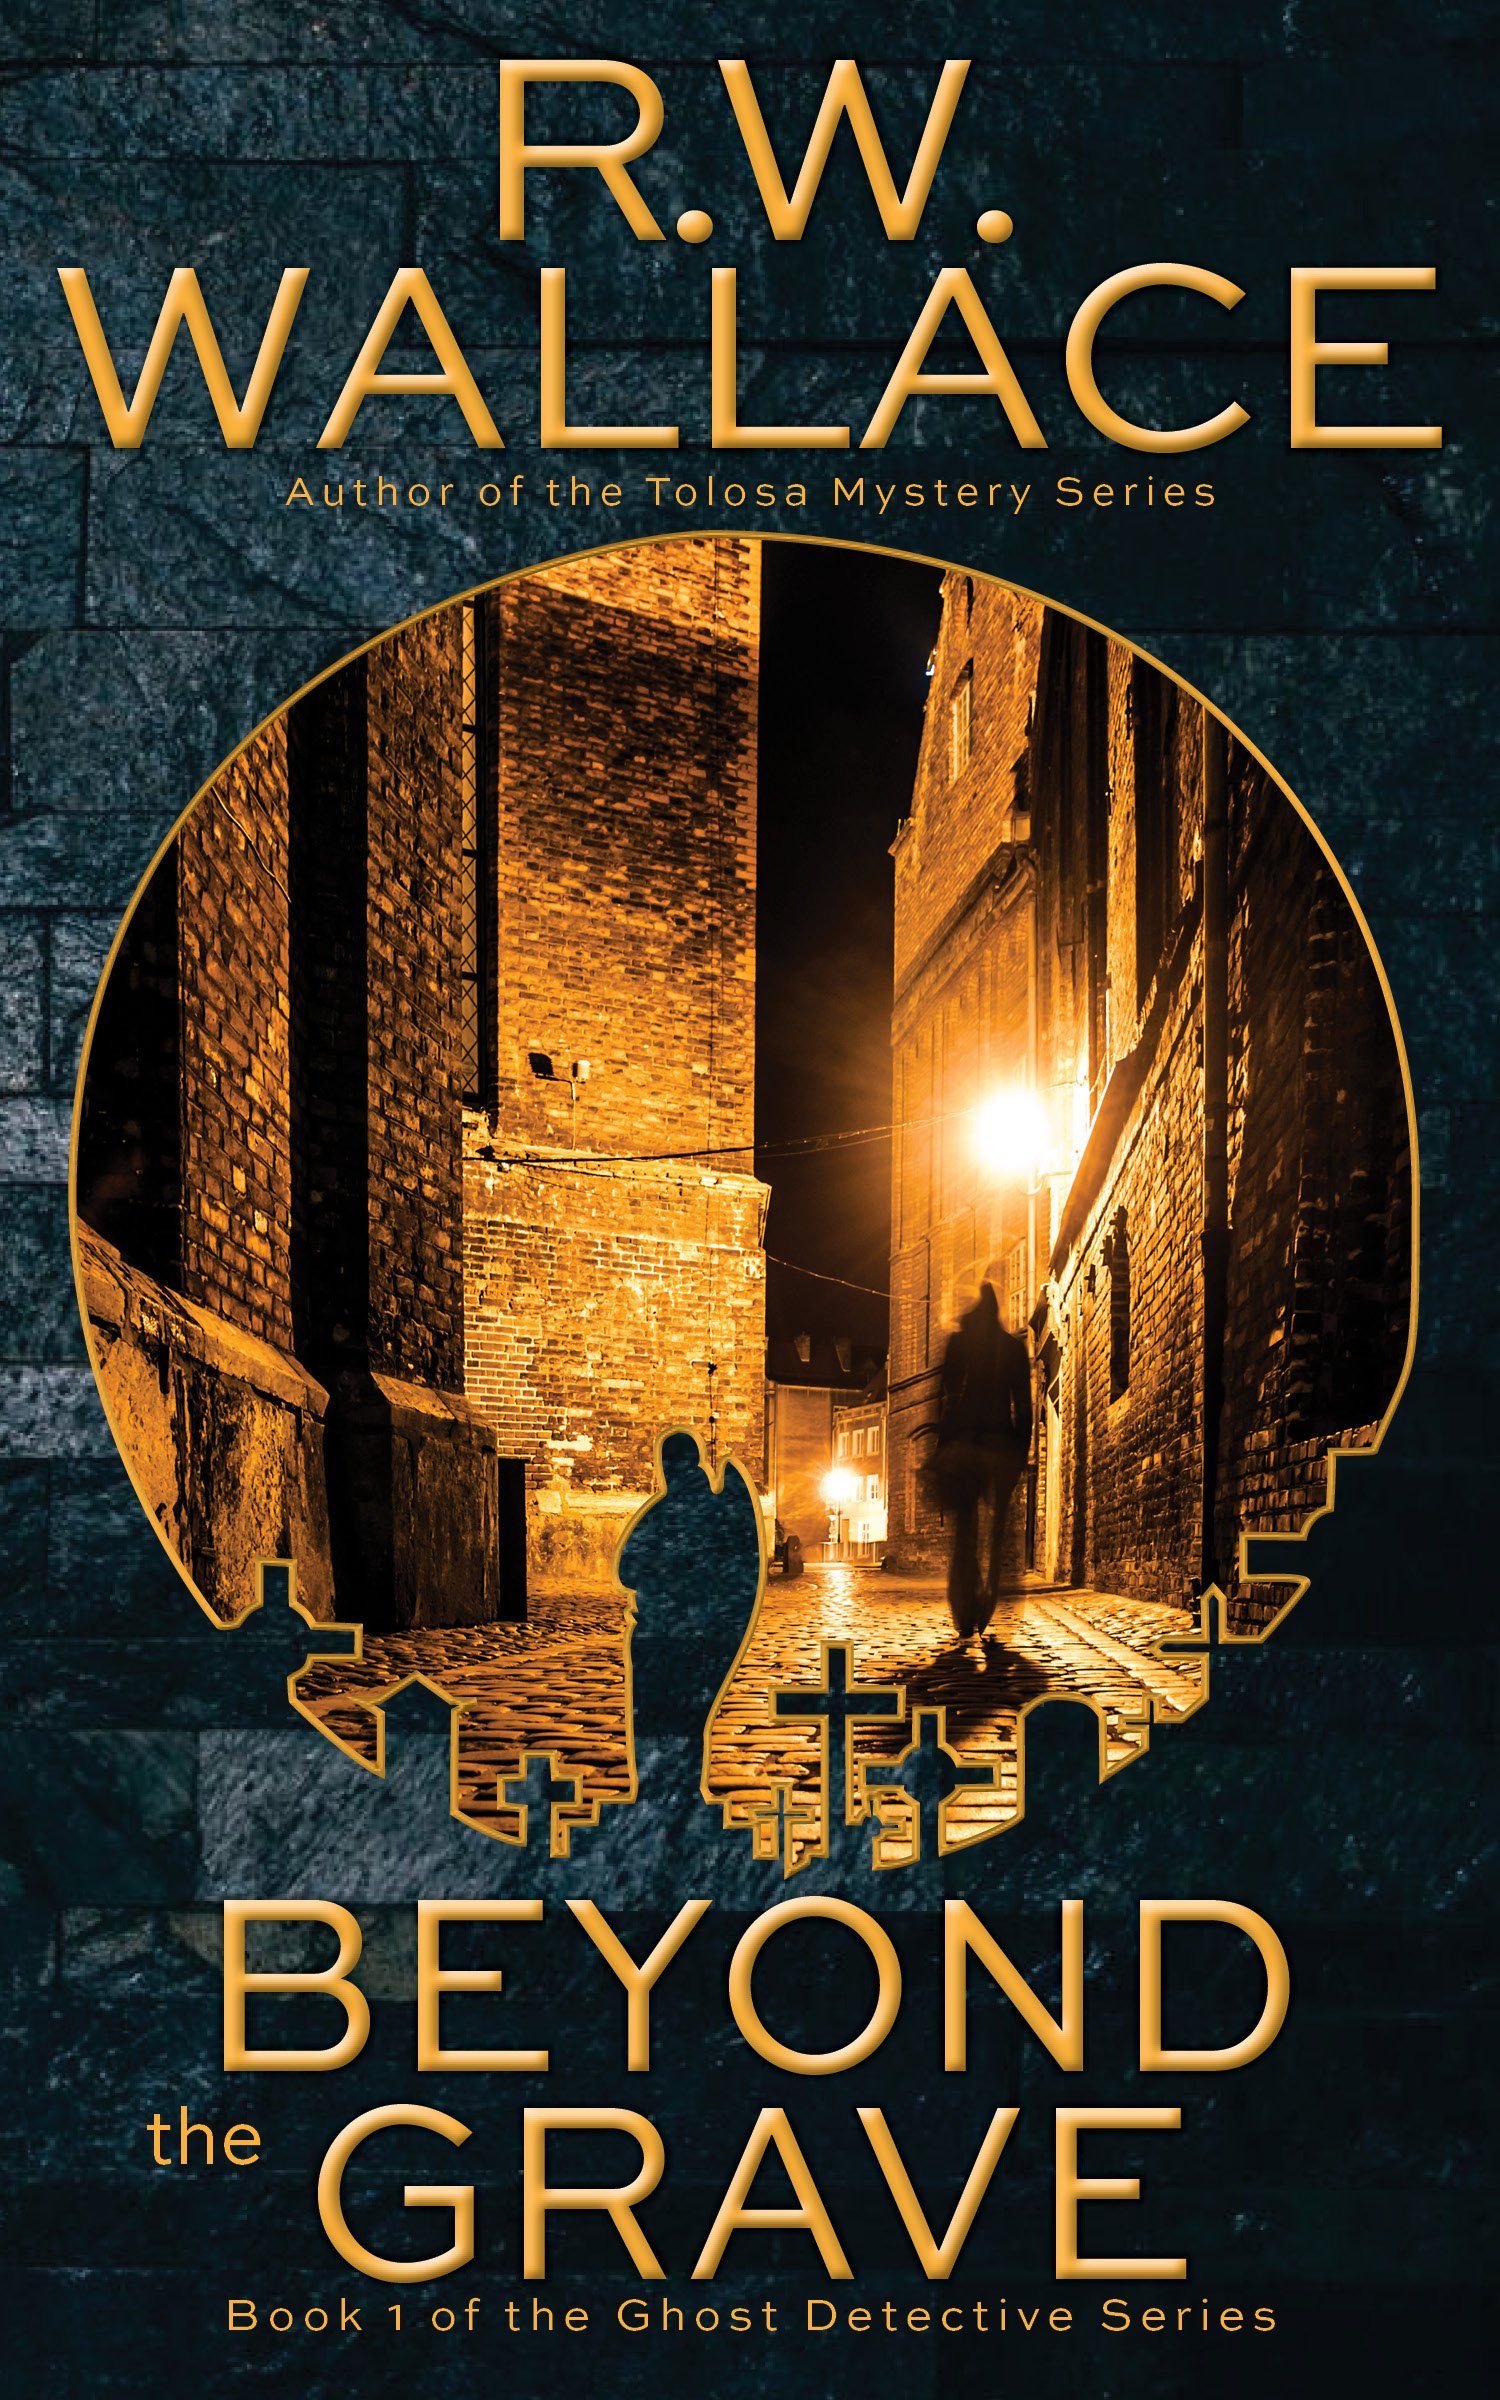 Beyond the Grave book cover. Dark stone background. Man walking through a street at night.